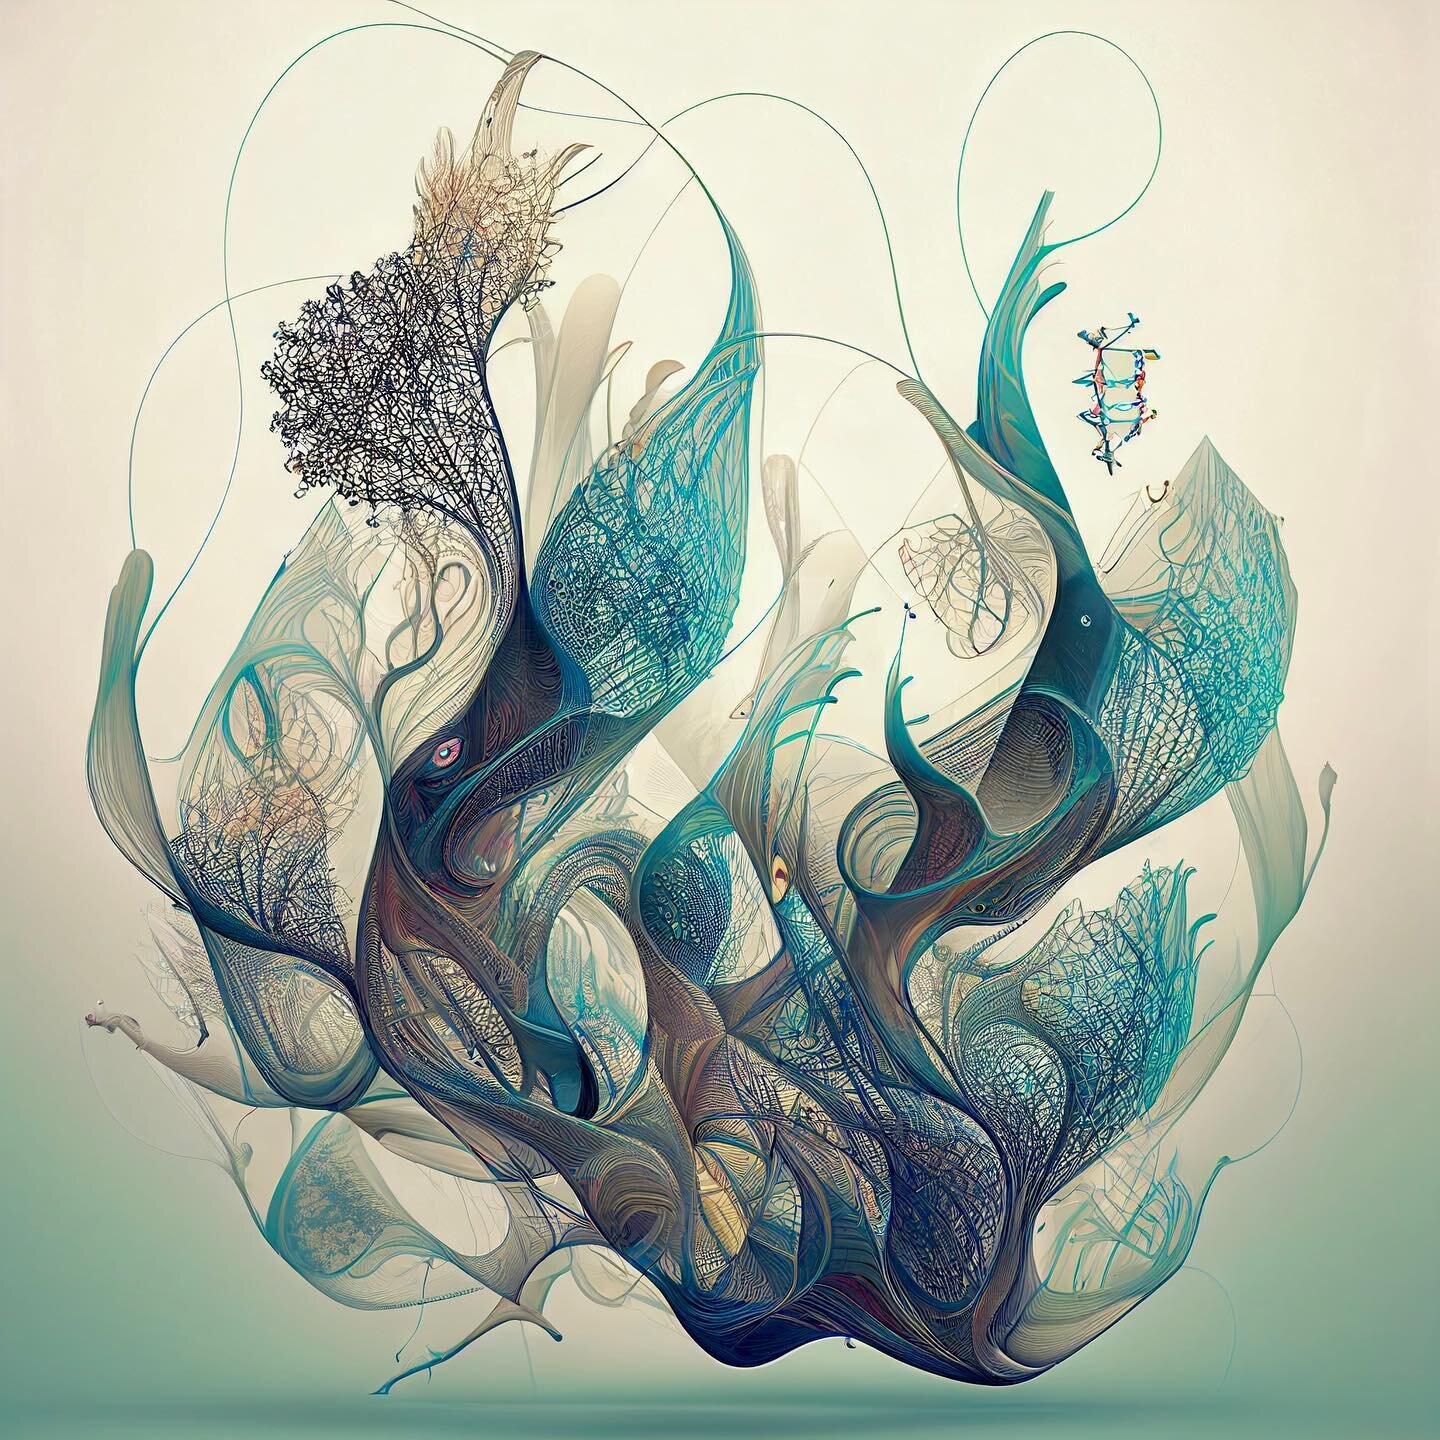 &ldquo;A Blooming Marine Network&rdquo;

Neuro-floral art series created by Jiyeon Kang using Midjourney AI and imagination

#dataart #visualization #art #aiart #midjourney #chatgpt #neuralnetworks #ai #artist #generativeart #flower #floral #flowerde